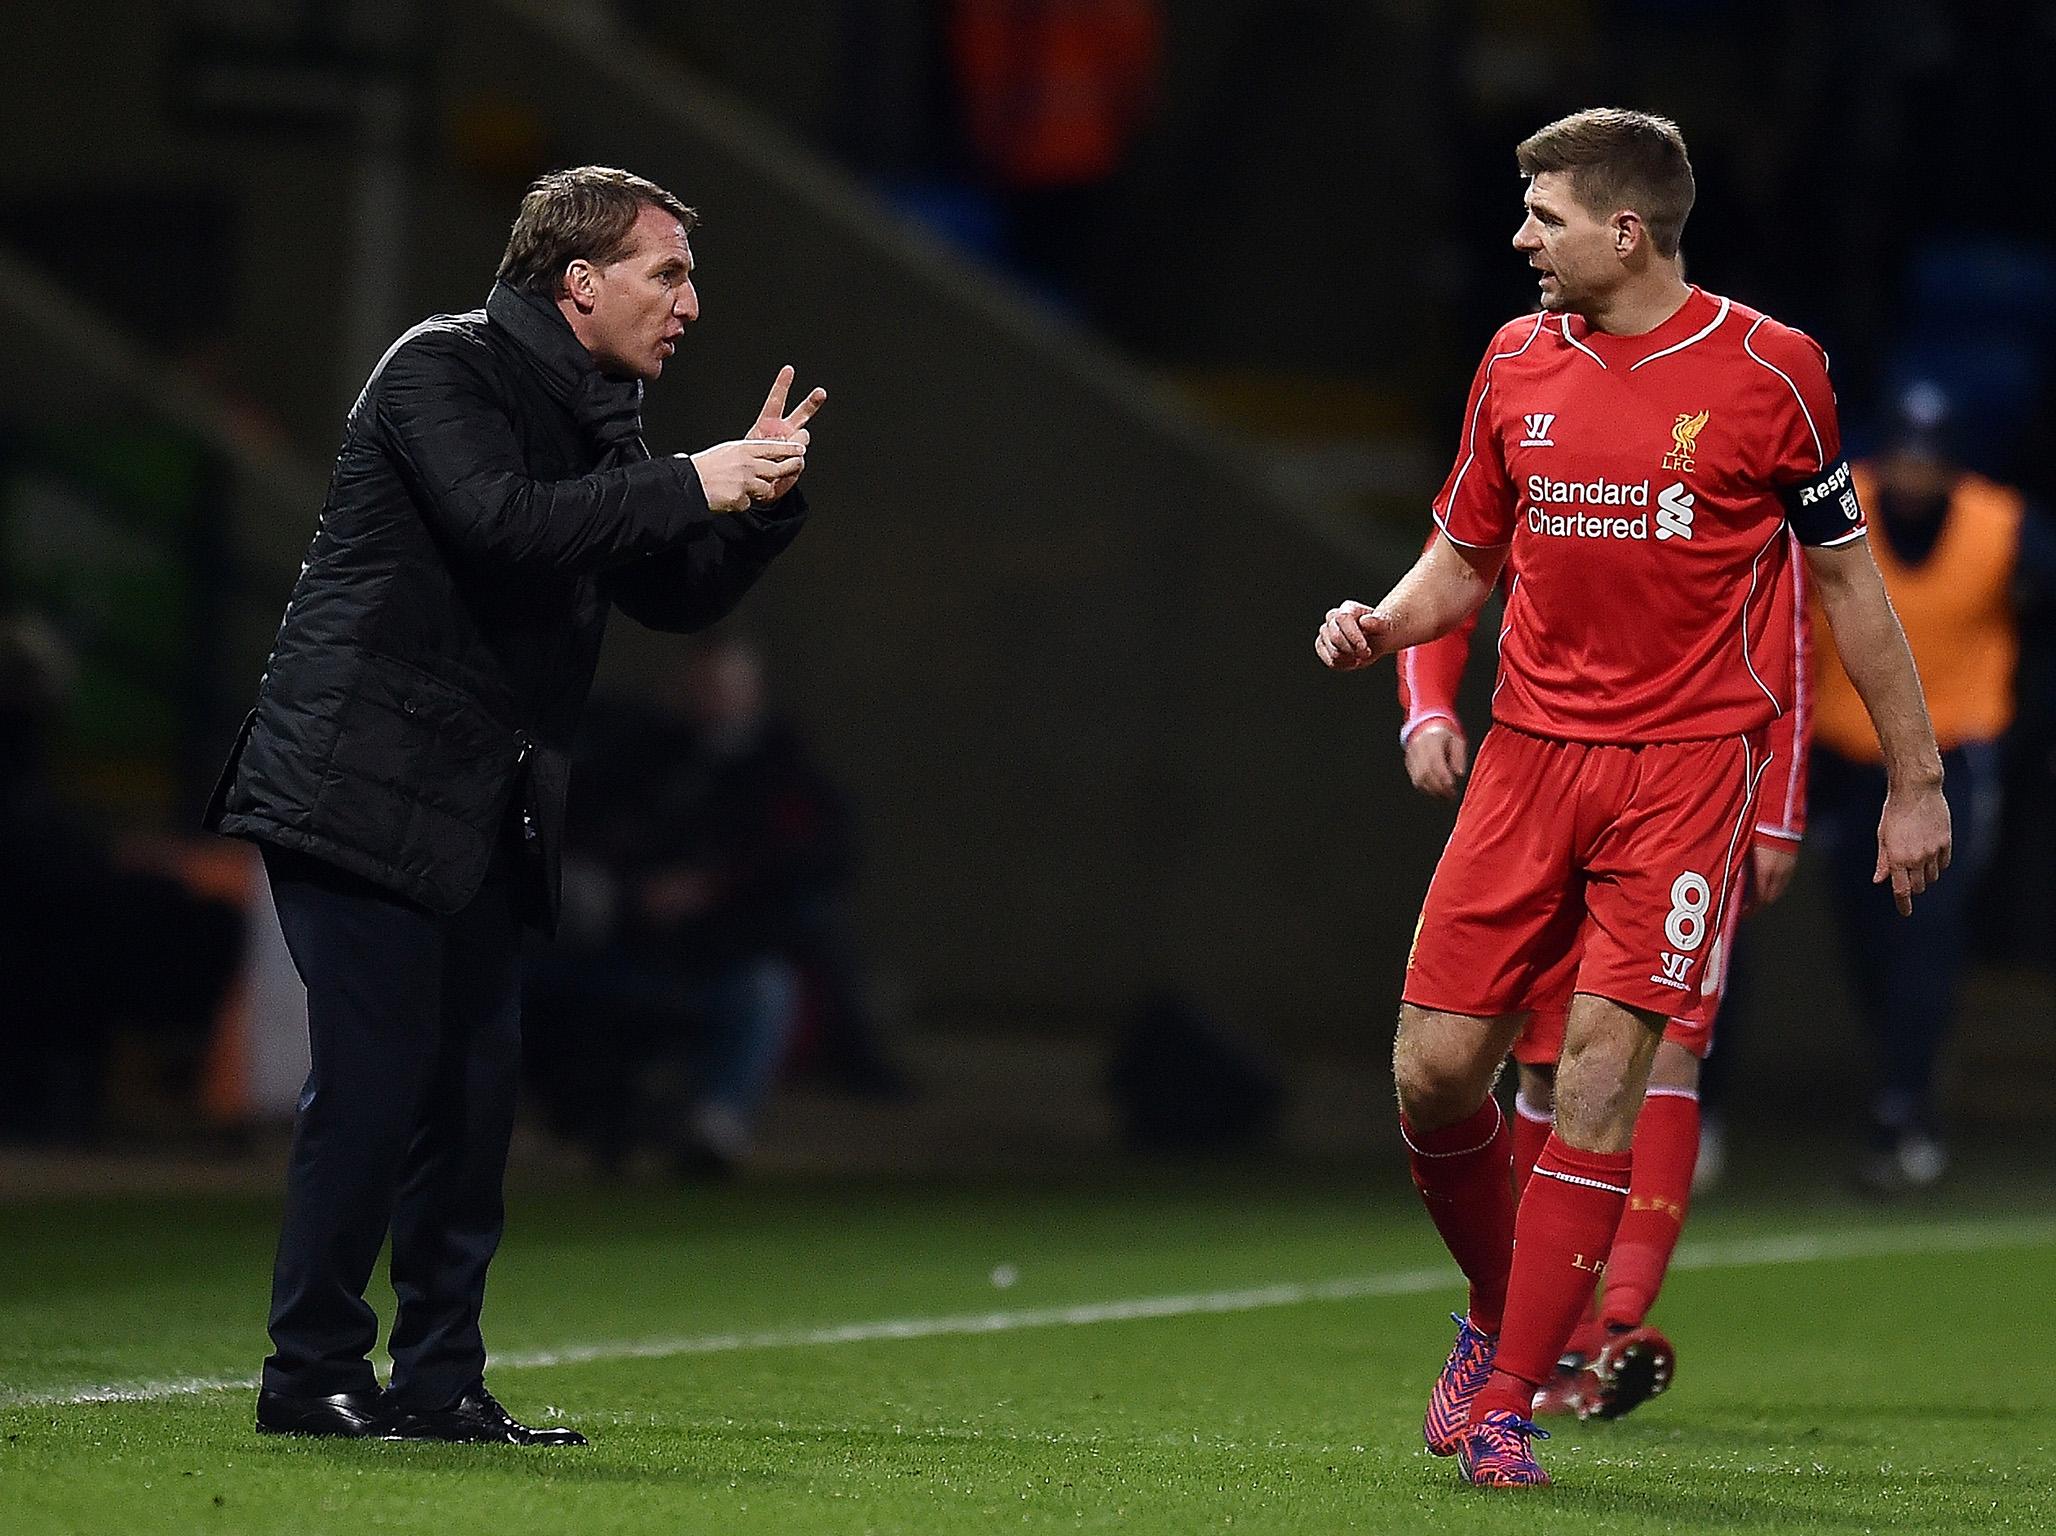 Celtic's Brendan Rodgers welcomes new Rangers manager Steven Gerrard to 'land of no sleep'